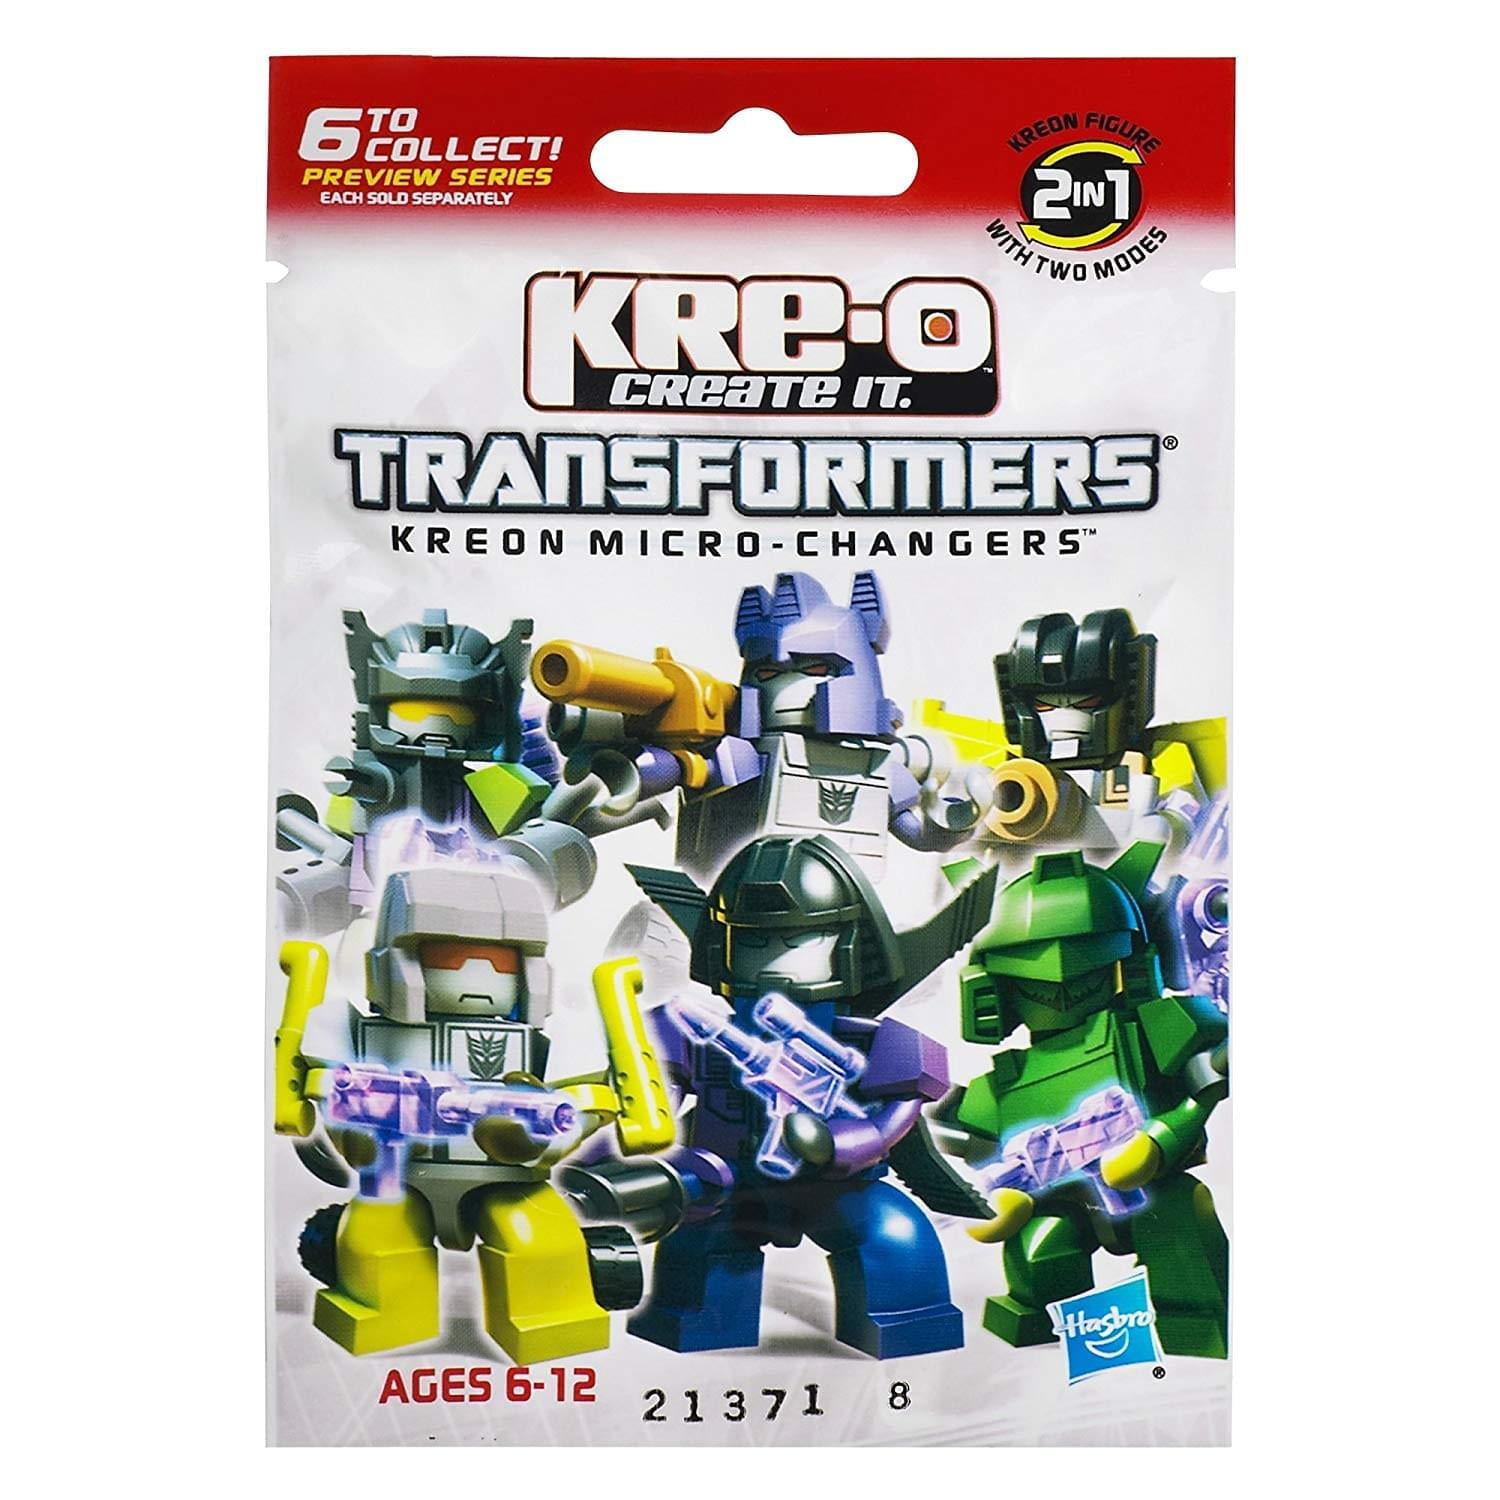 Details about   Hasbro Kre-o Transformers Micro Changers Complete Case of 24 Wave 3 Collection 3 